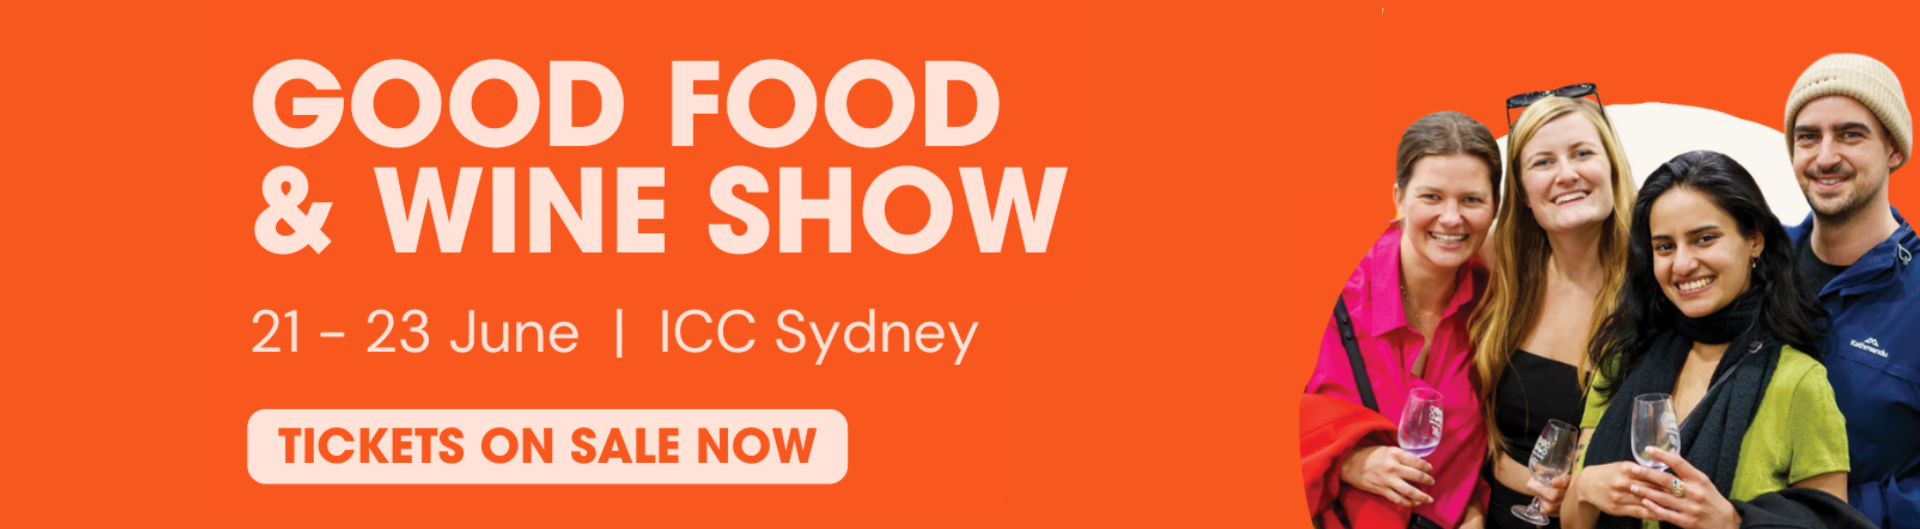 Good Food & Wine Show is coming to ICC Sydney on 21 to 23 June.